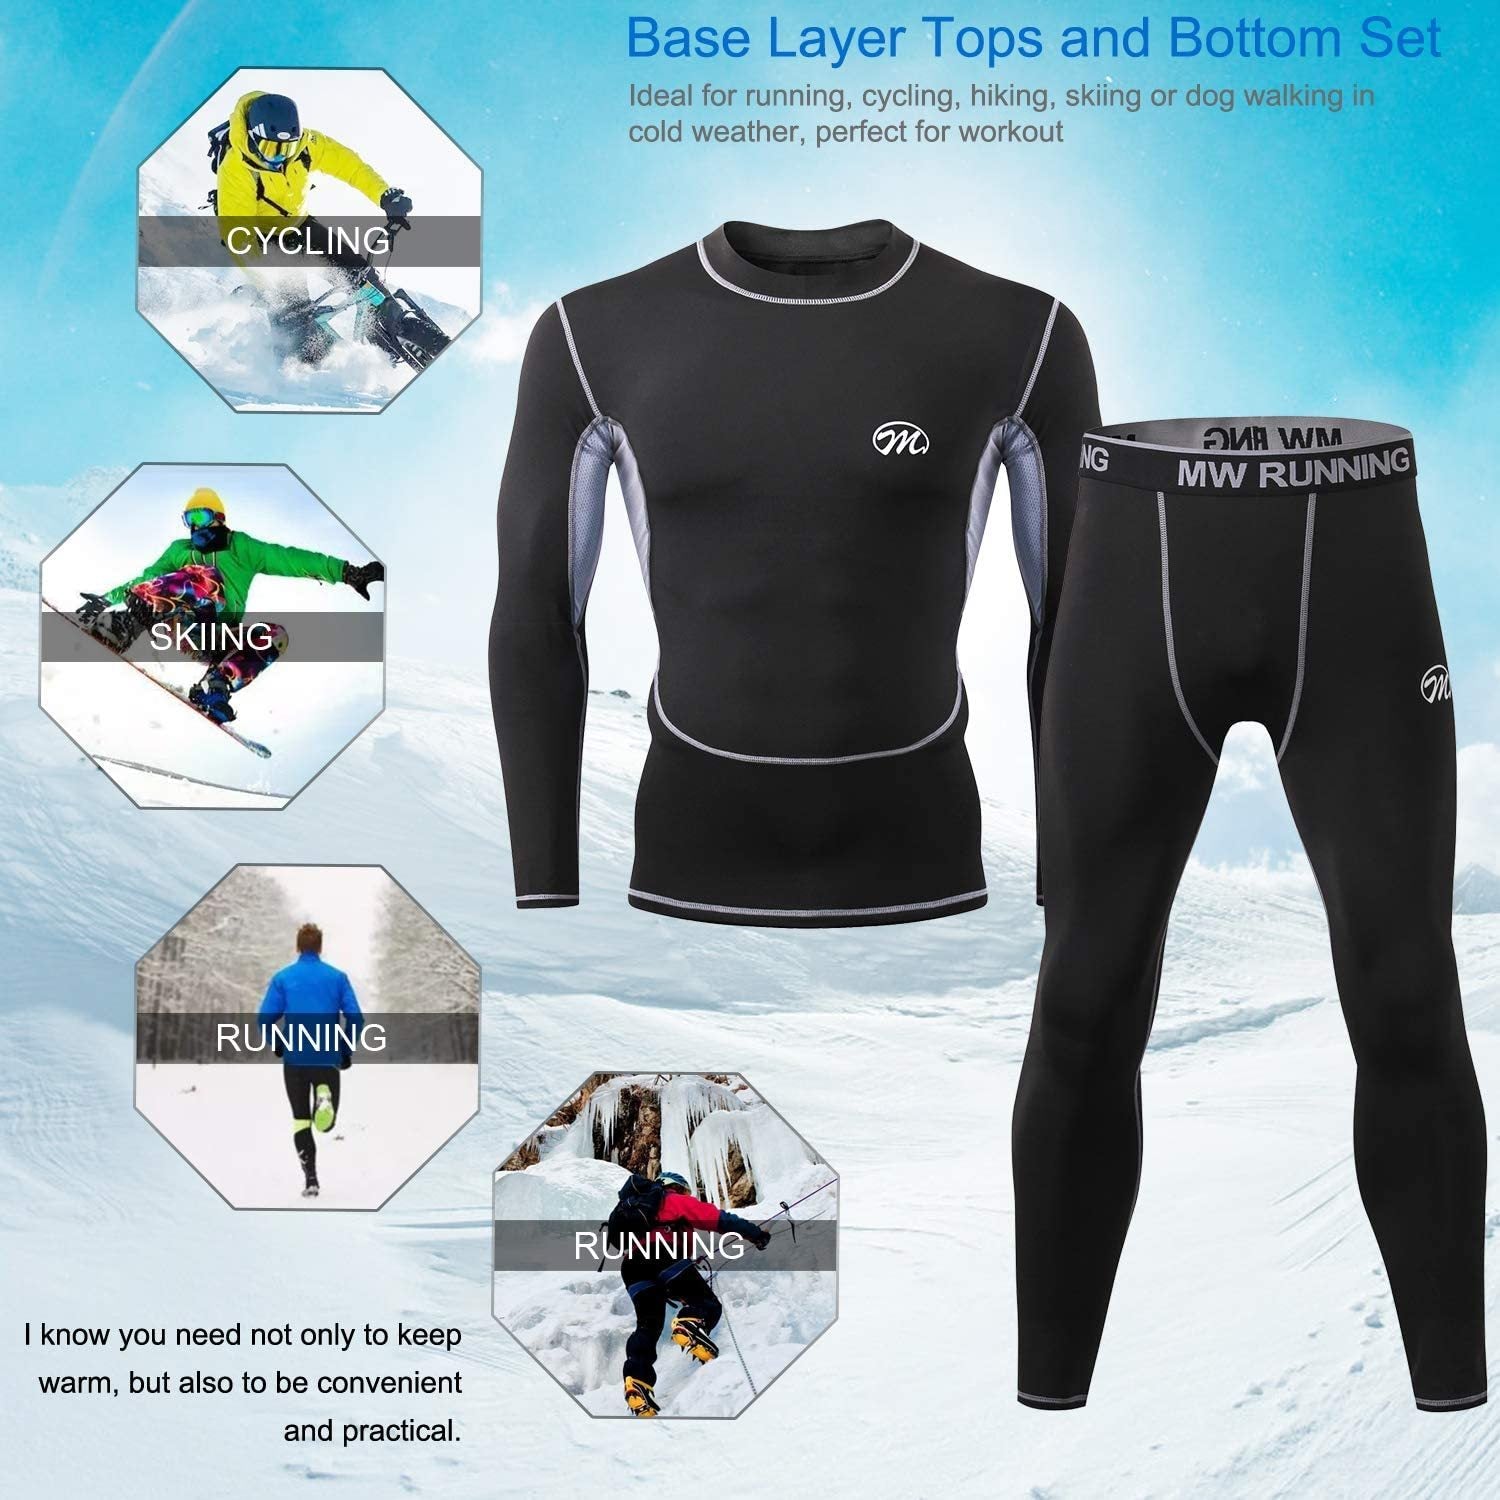  Mens Thermal Underwear Set, Winter Ski Gear Fleece Lined Long  Johns Base Layer Warm Top & Bottom For Skiing